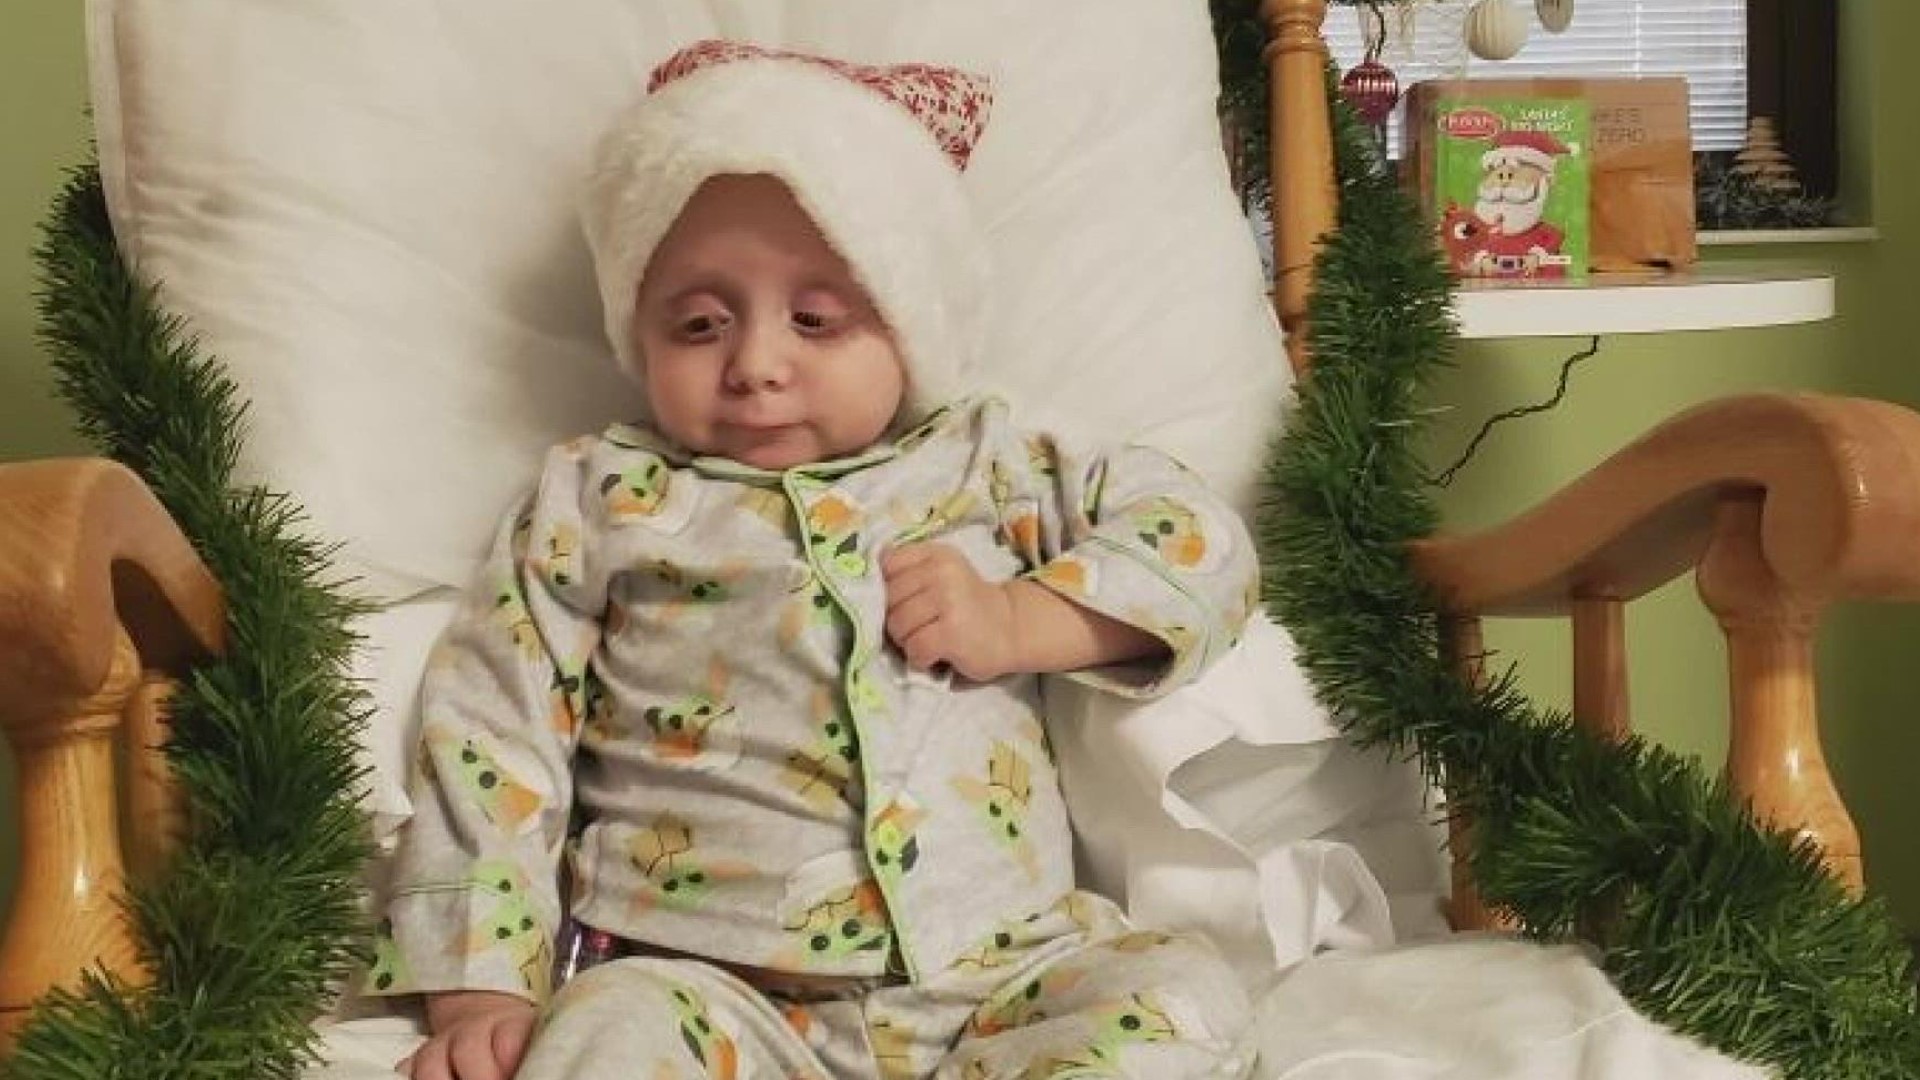 A family is trying to make the holidays a little brighter for their 2-year-old stuck in the hospital for Christmas. Nova's family wants to make him smile.